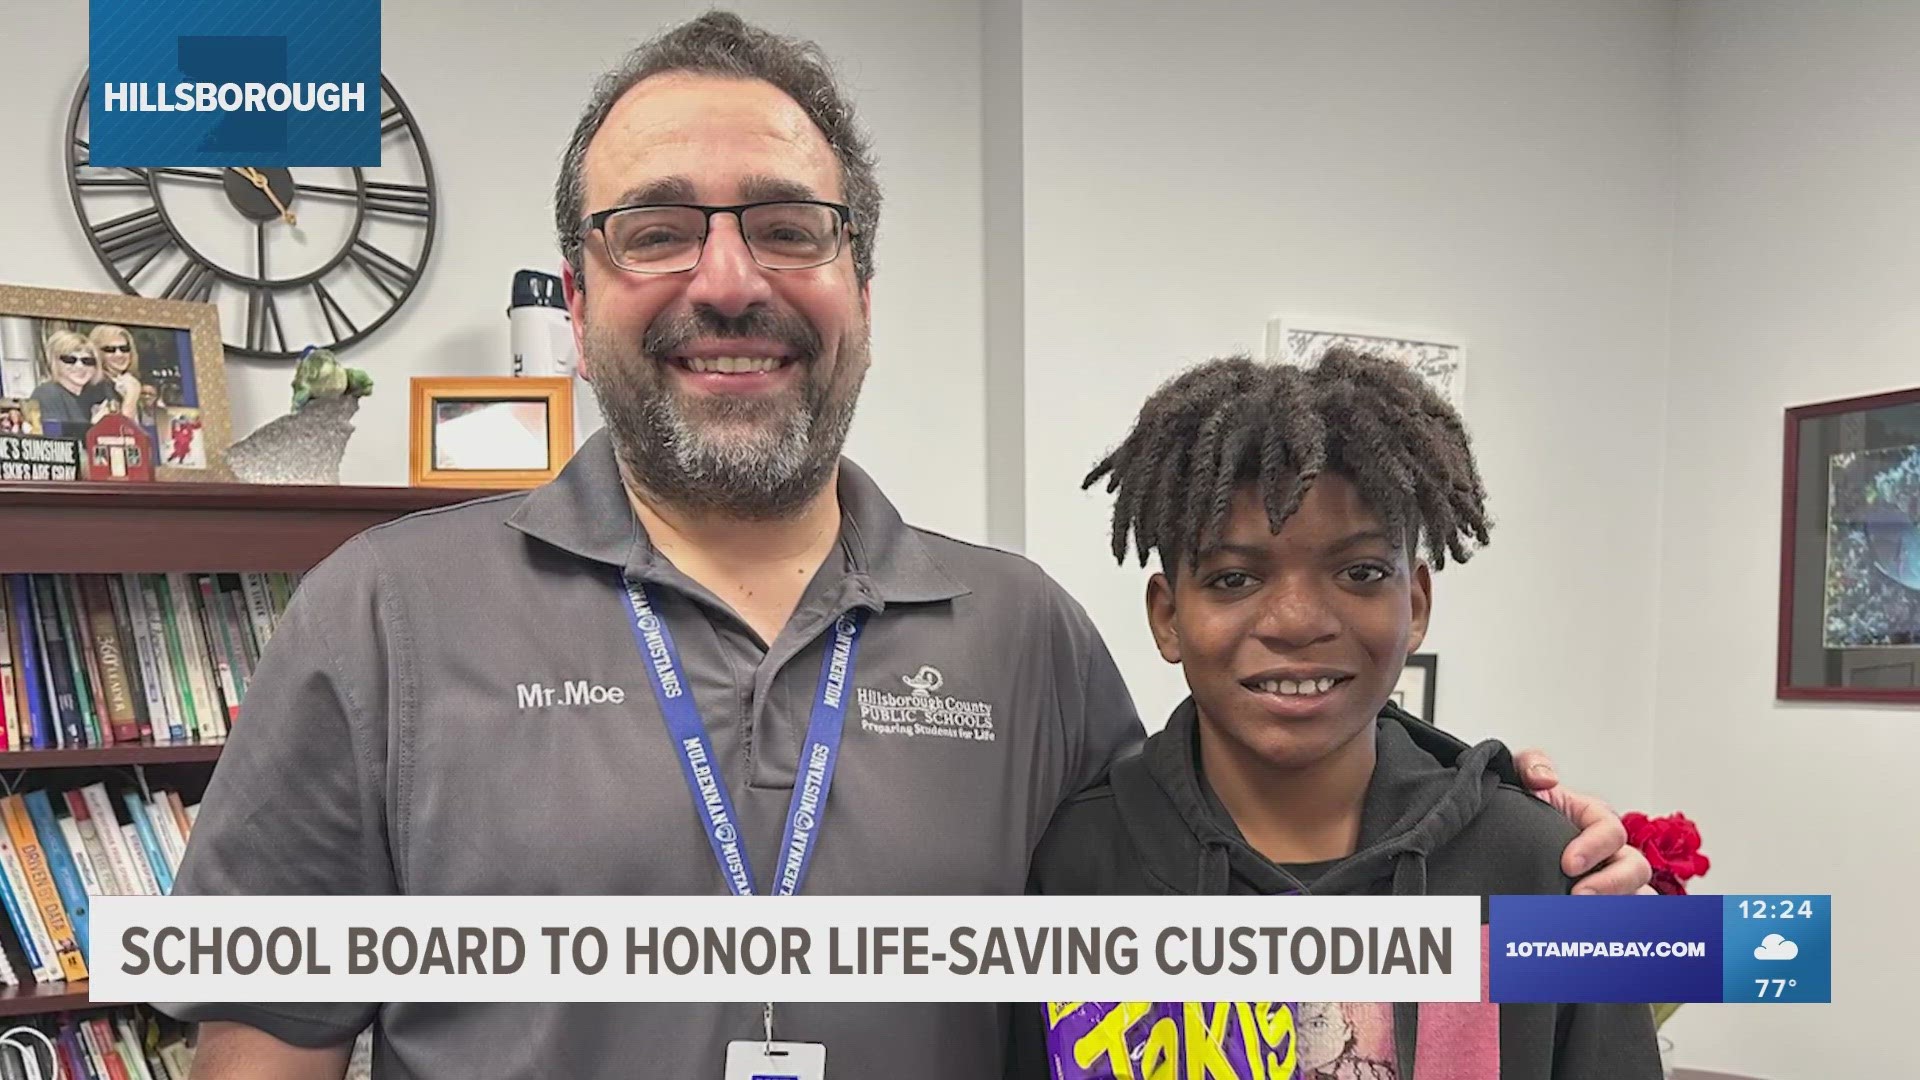 Mr. Moe is a custodian at Mulrennan Middle School in Valrico who saved a 7th-grade student from choking on his lunch in February.